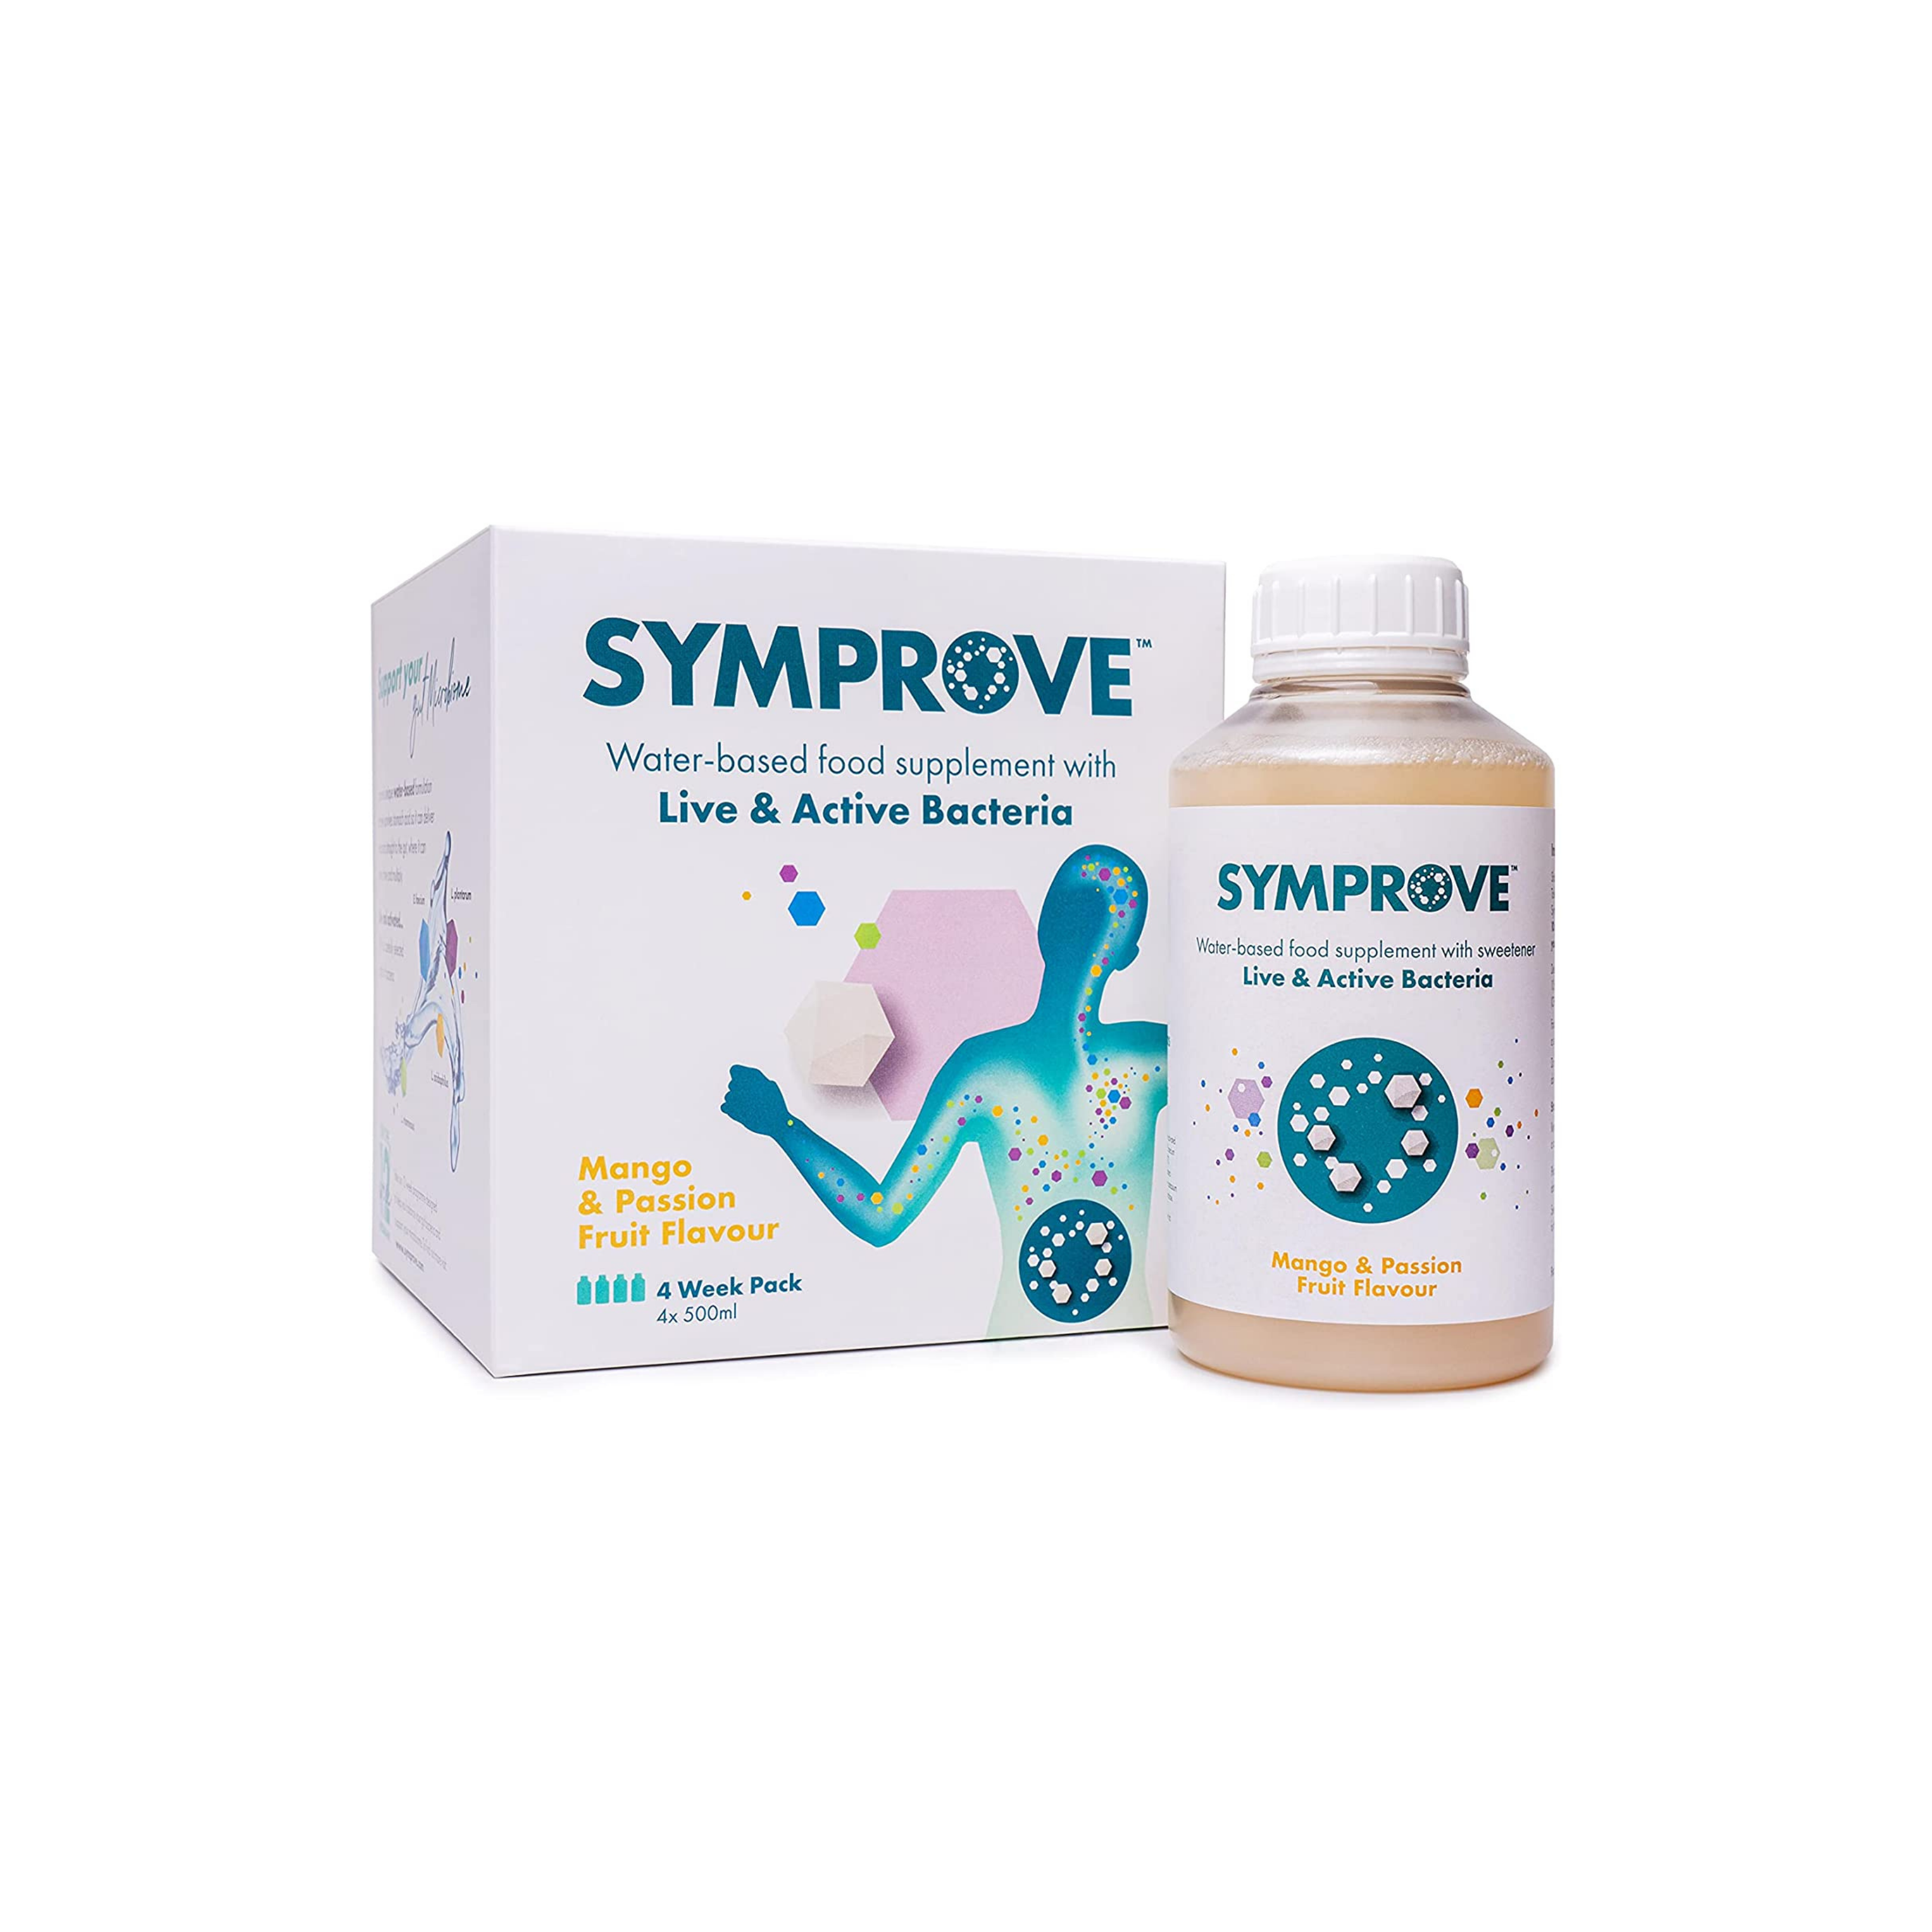 Symprove Probiotic Supplement Mango and Passion Fruit - 4 x 500ml (4 Week Pack) 